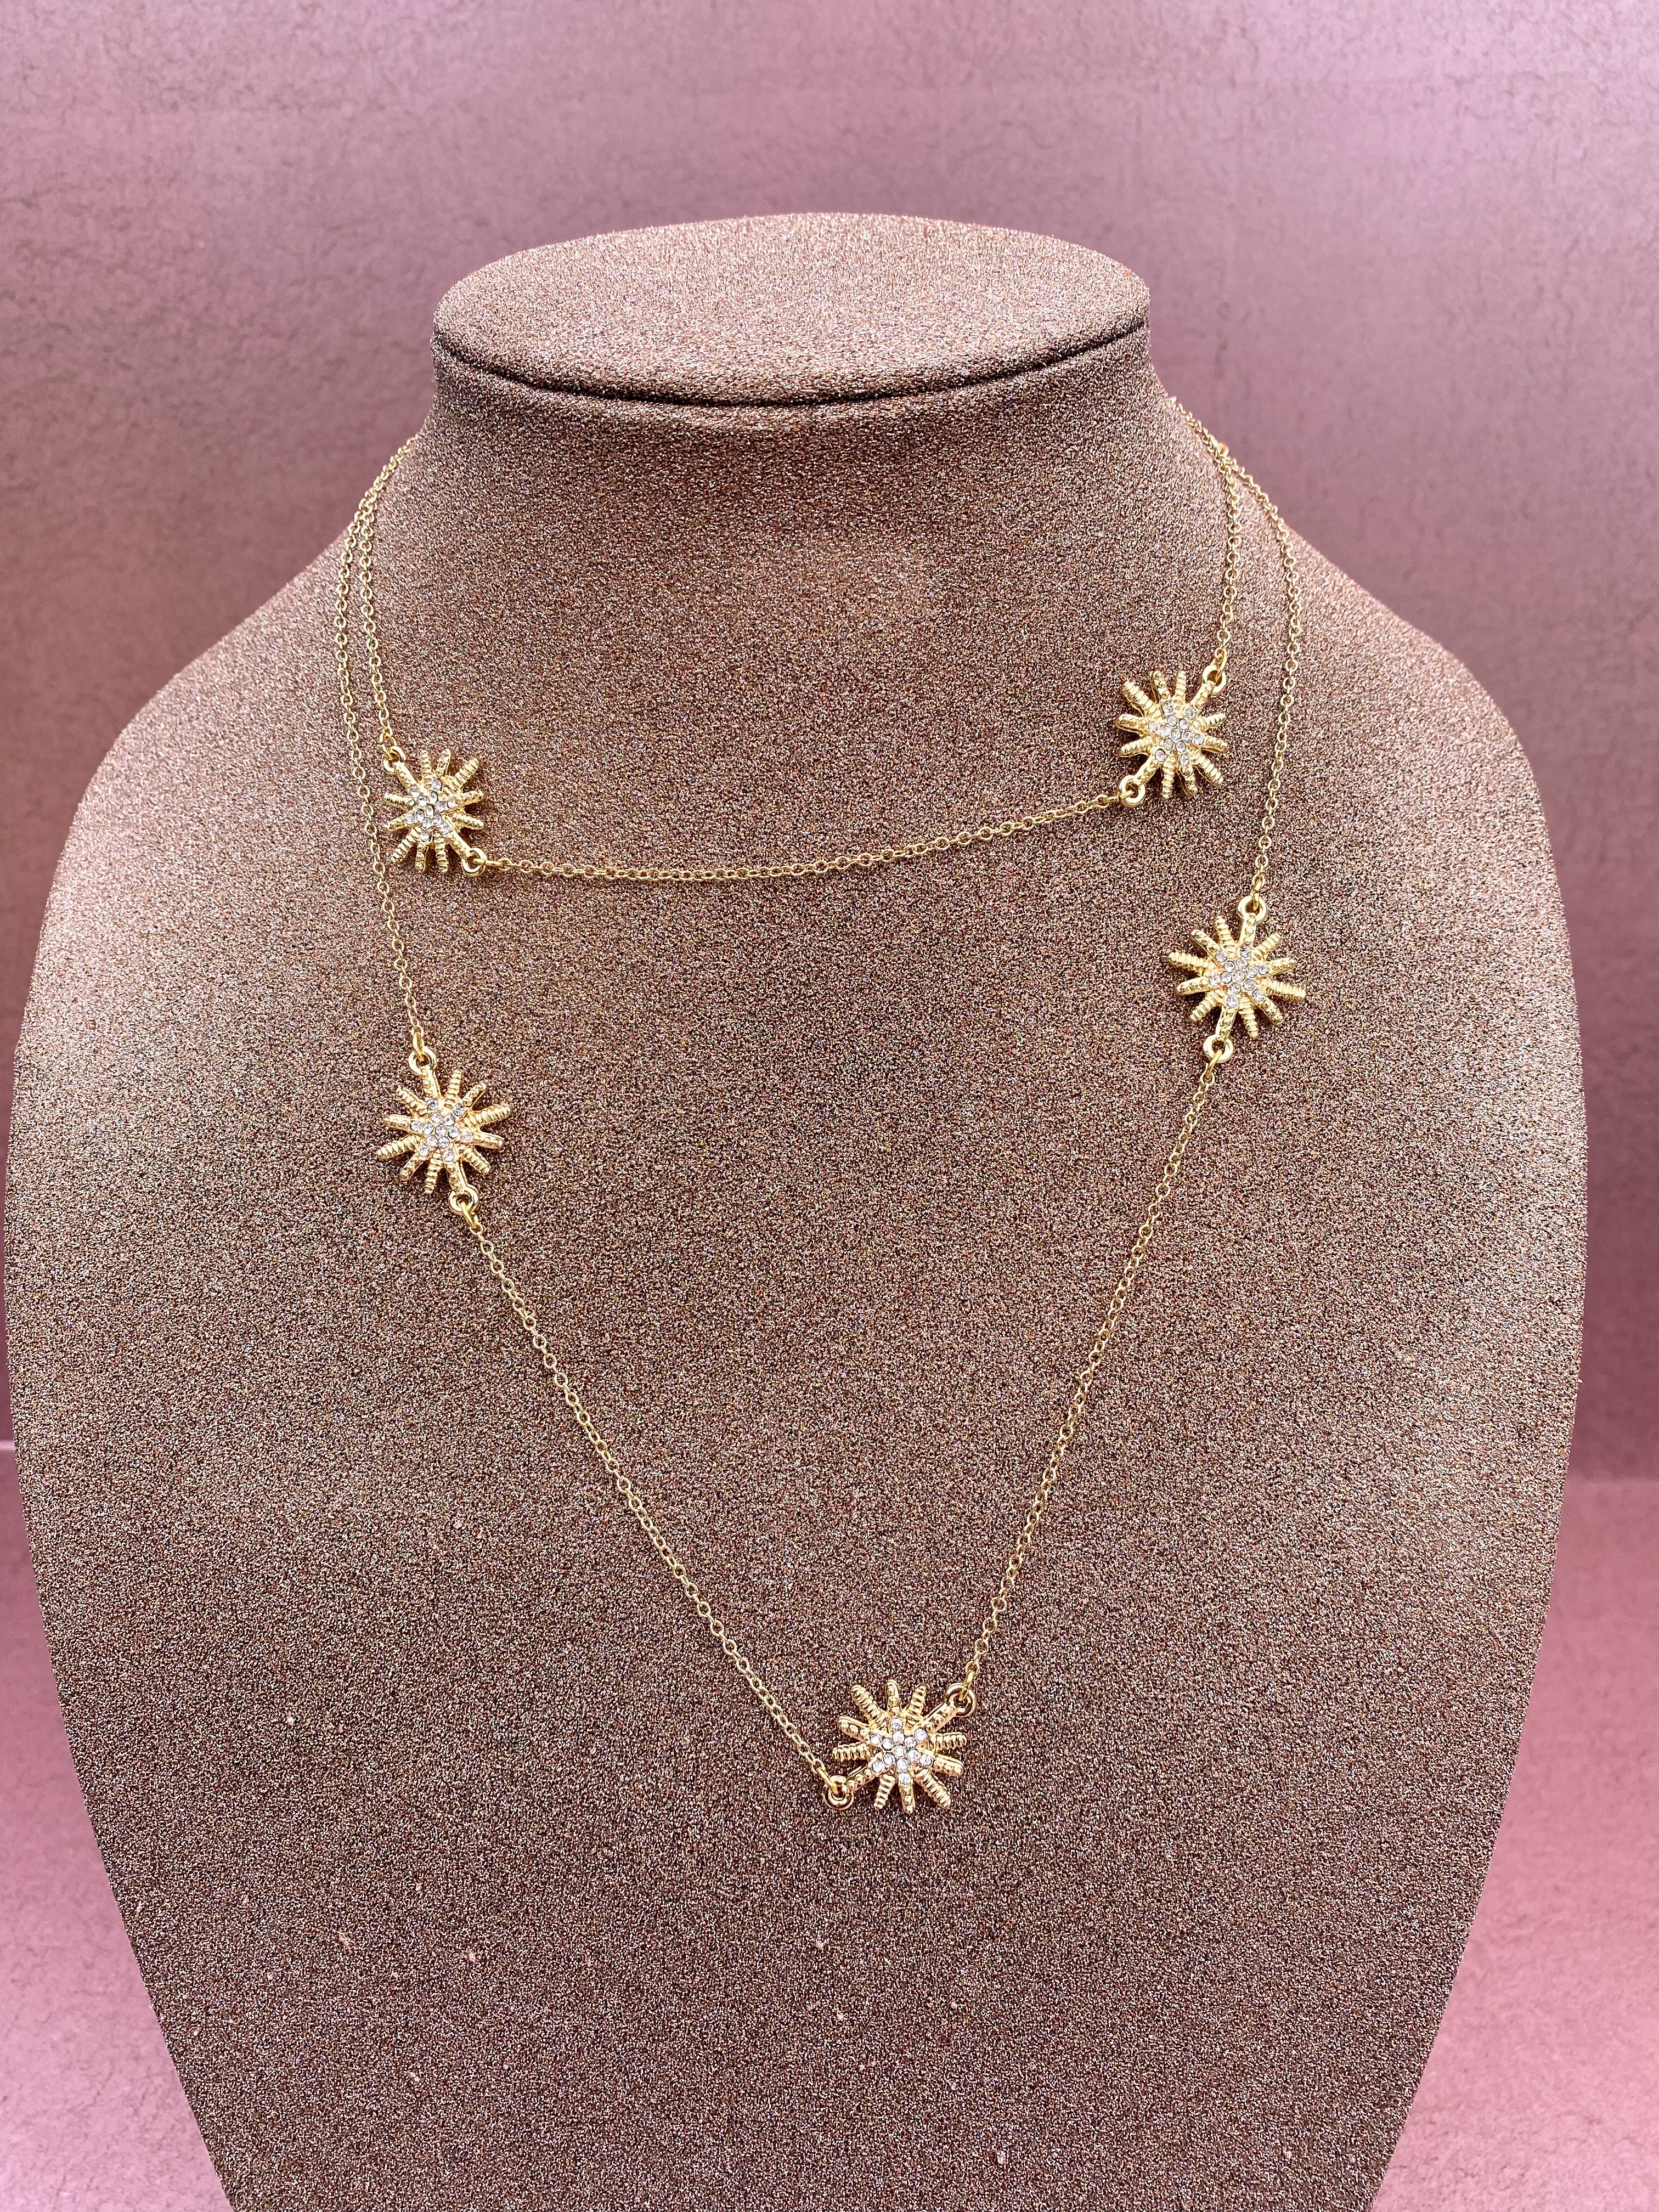 Gold Starburst Necklace with Gold or Silver Chain